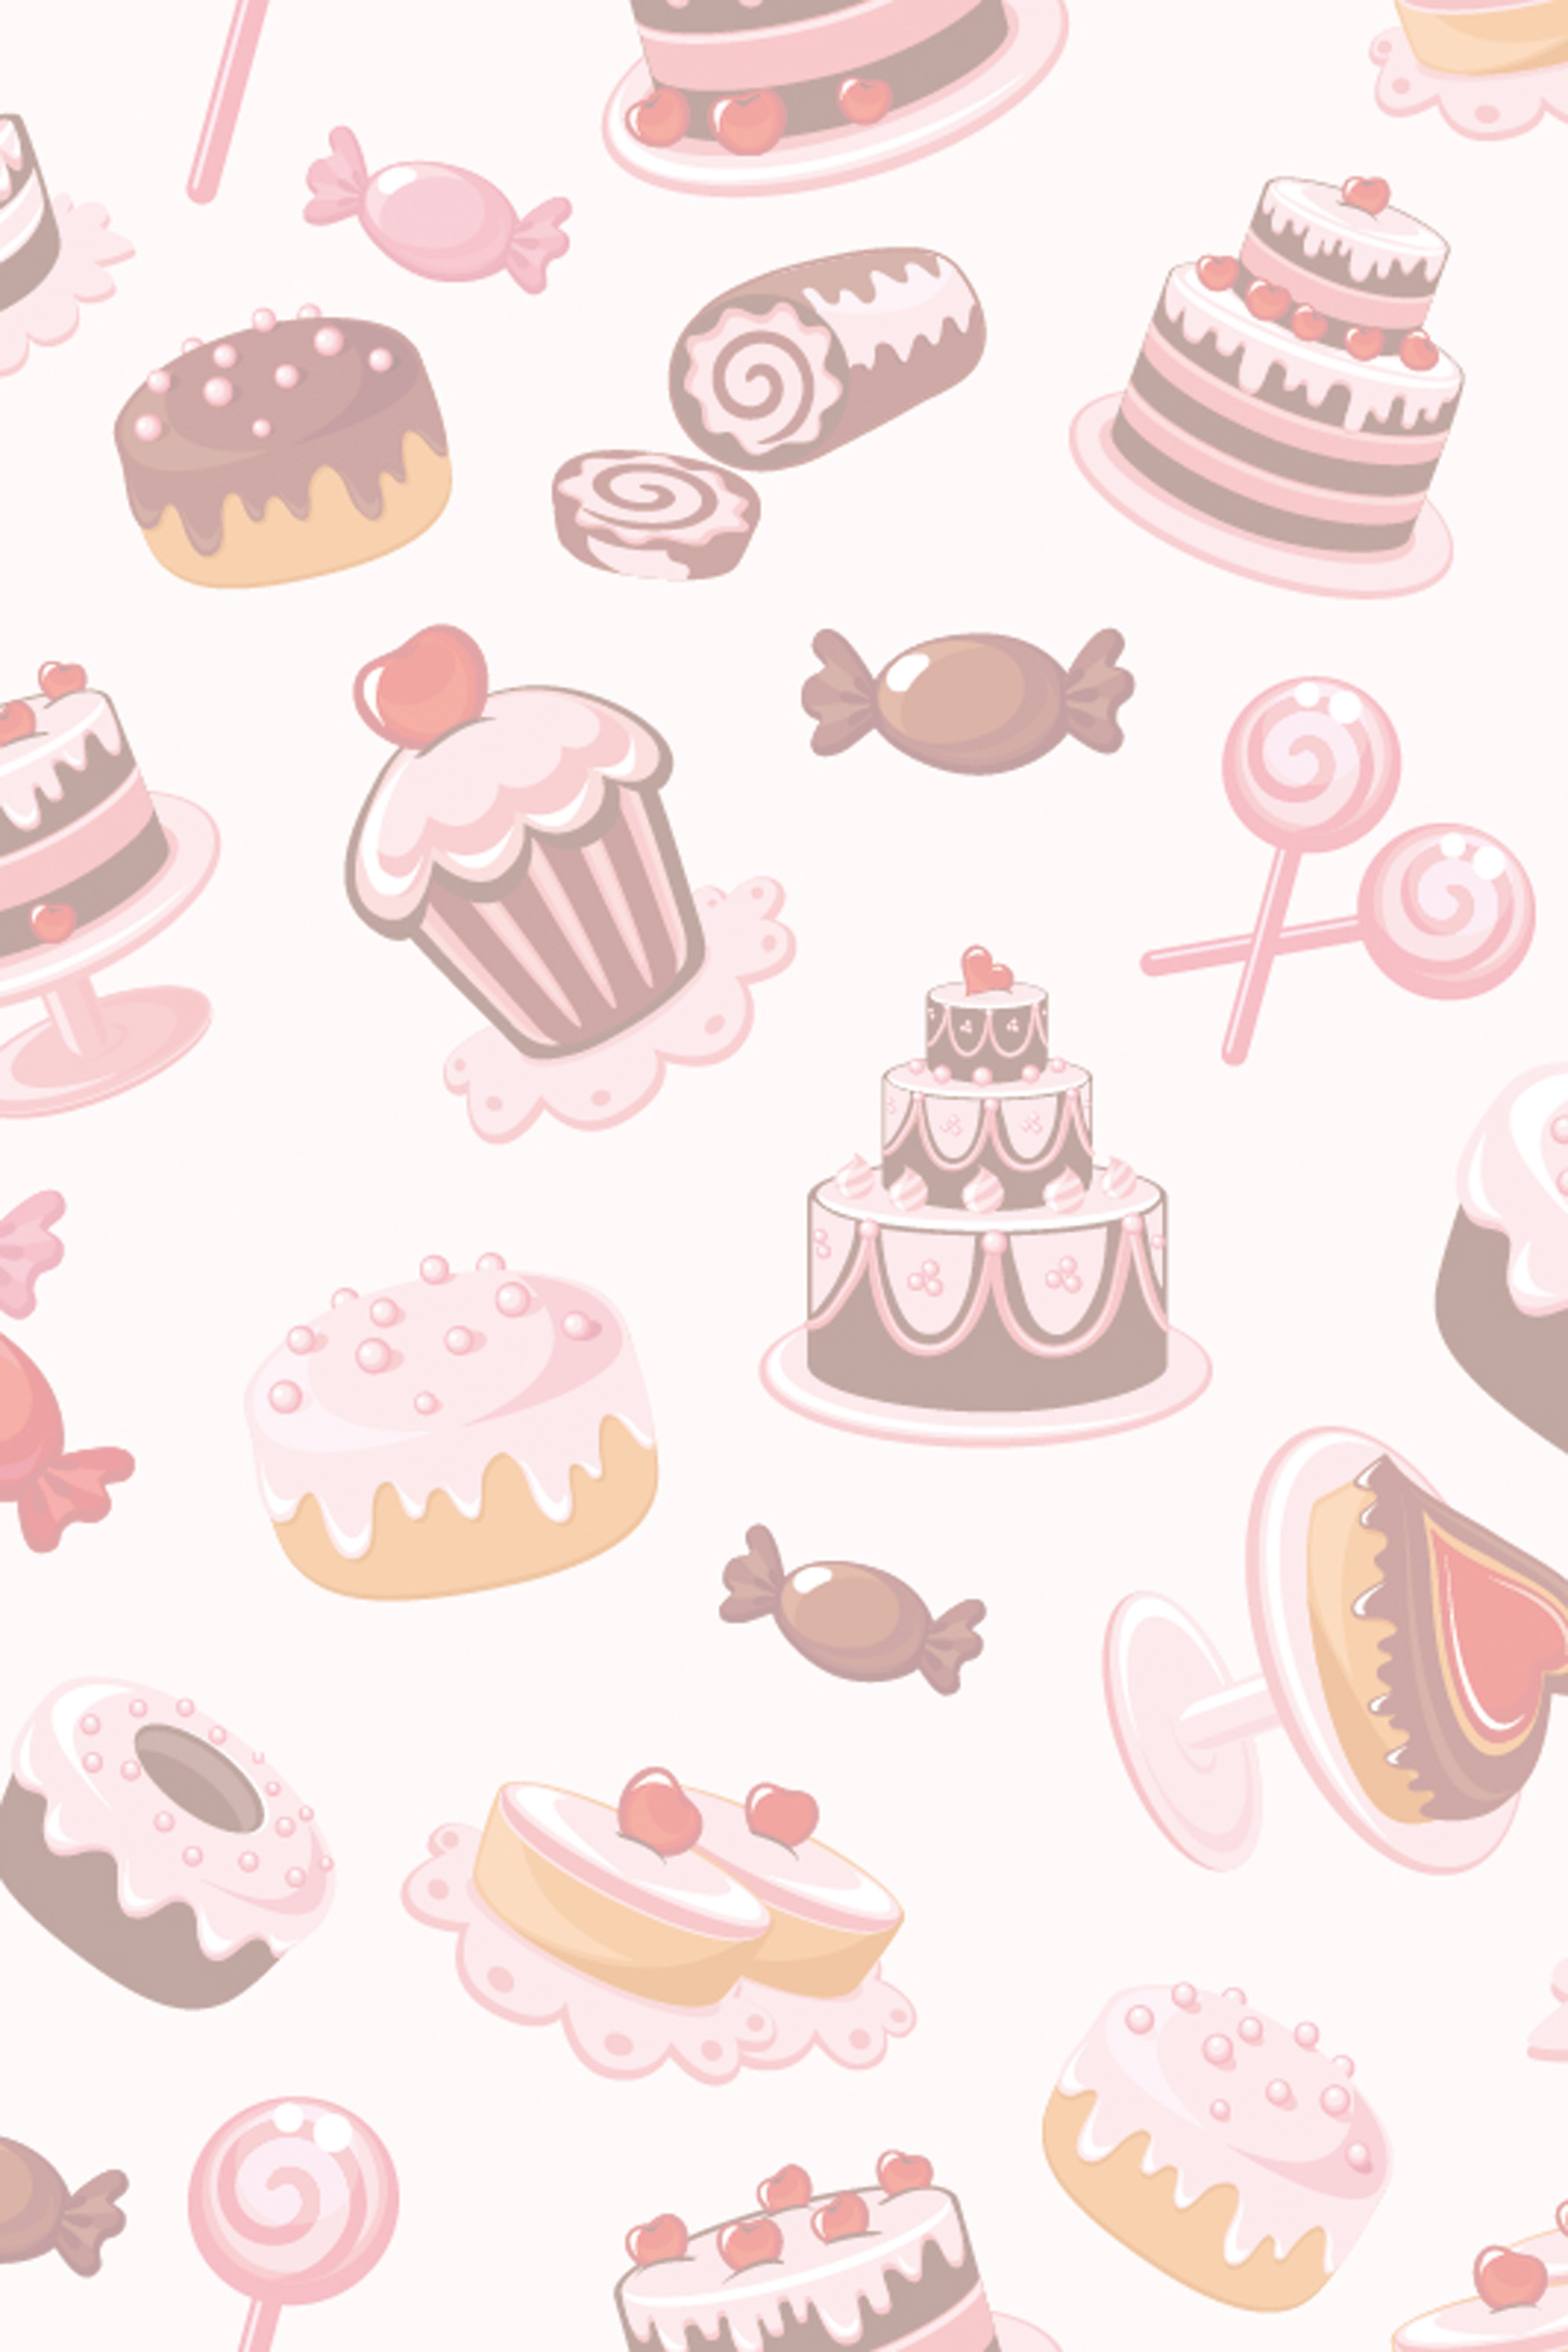 Strawberry and Cake Backgrounds | Foods & Drinks, Health Templates | Free  PPT Grounds